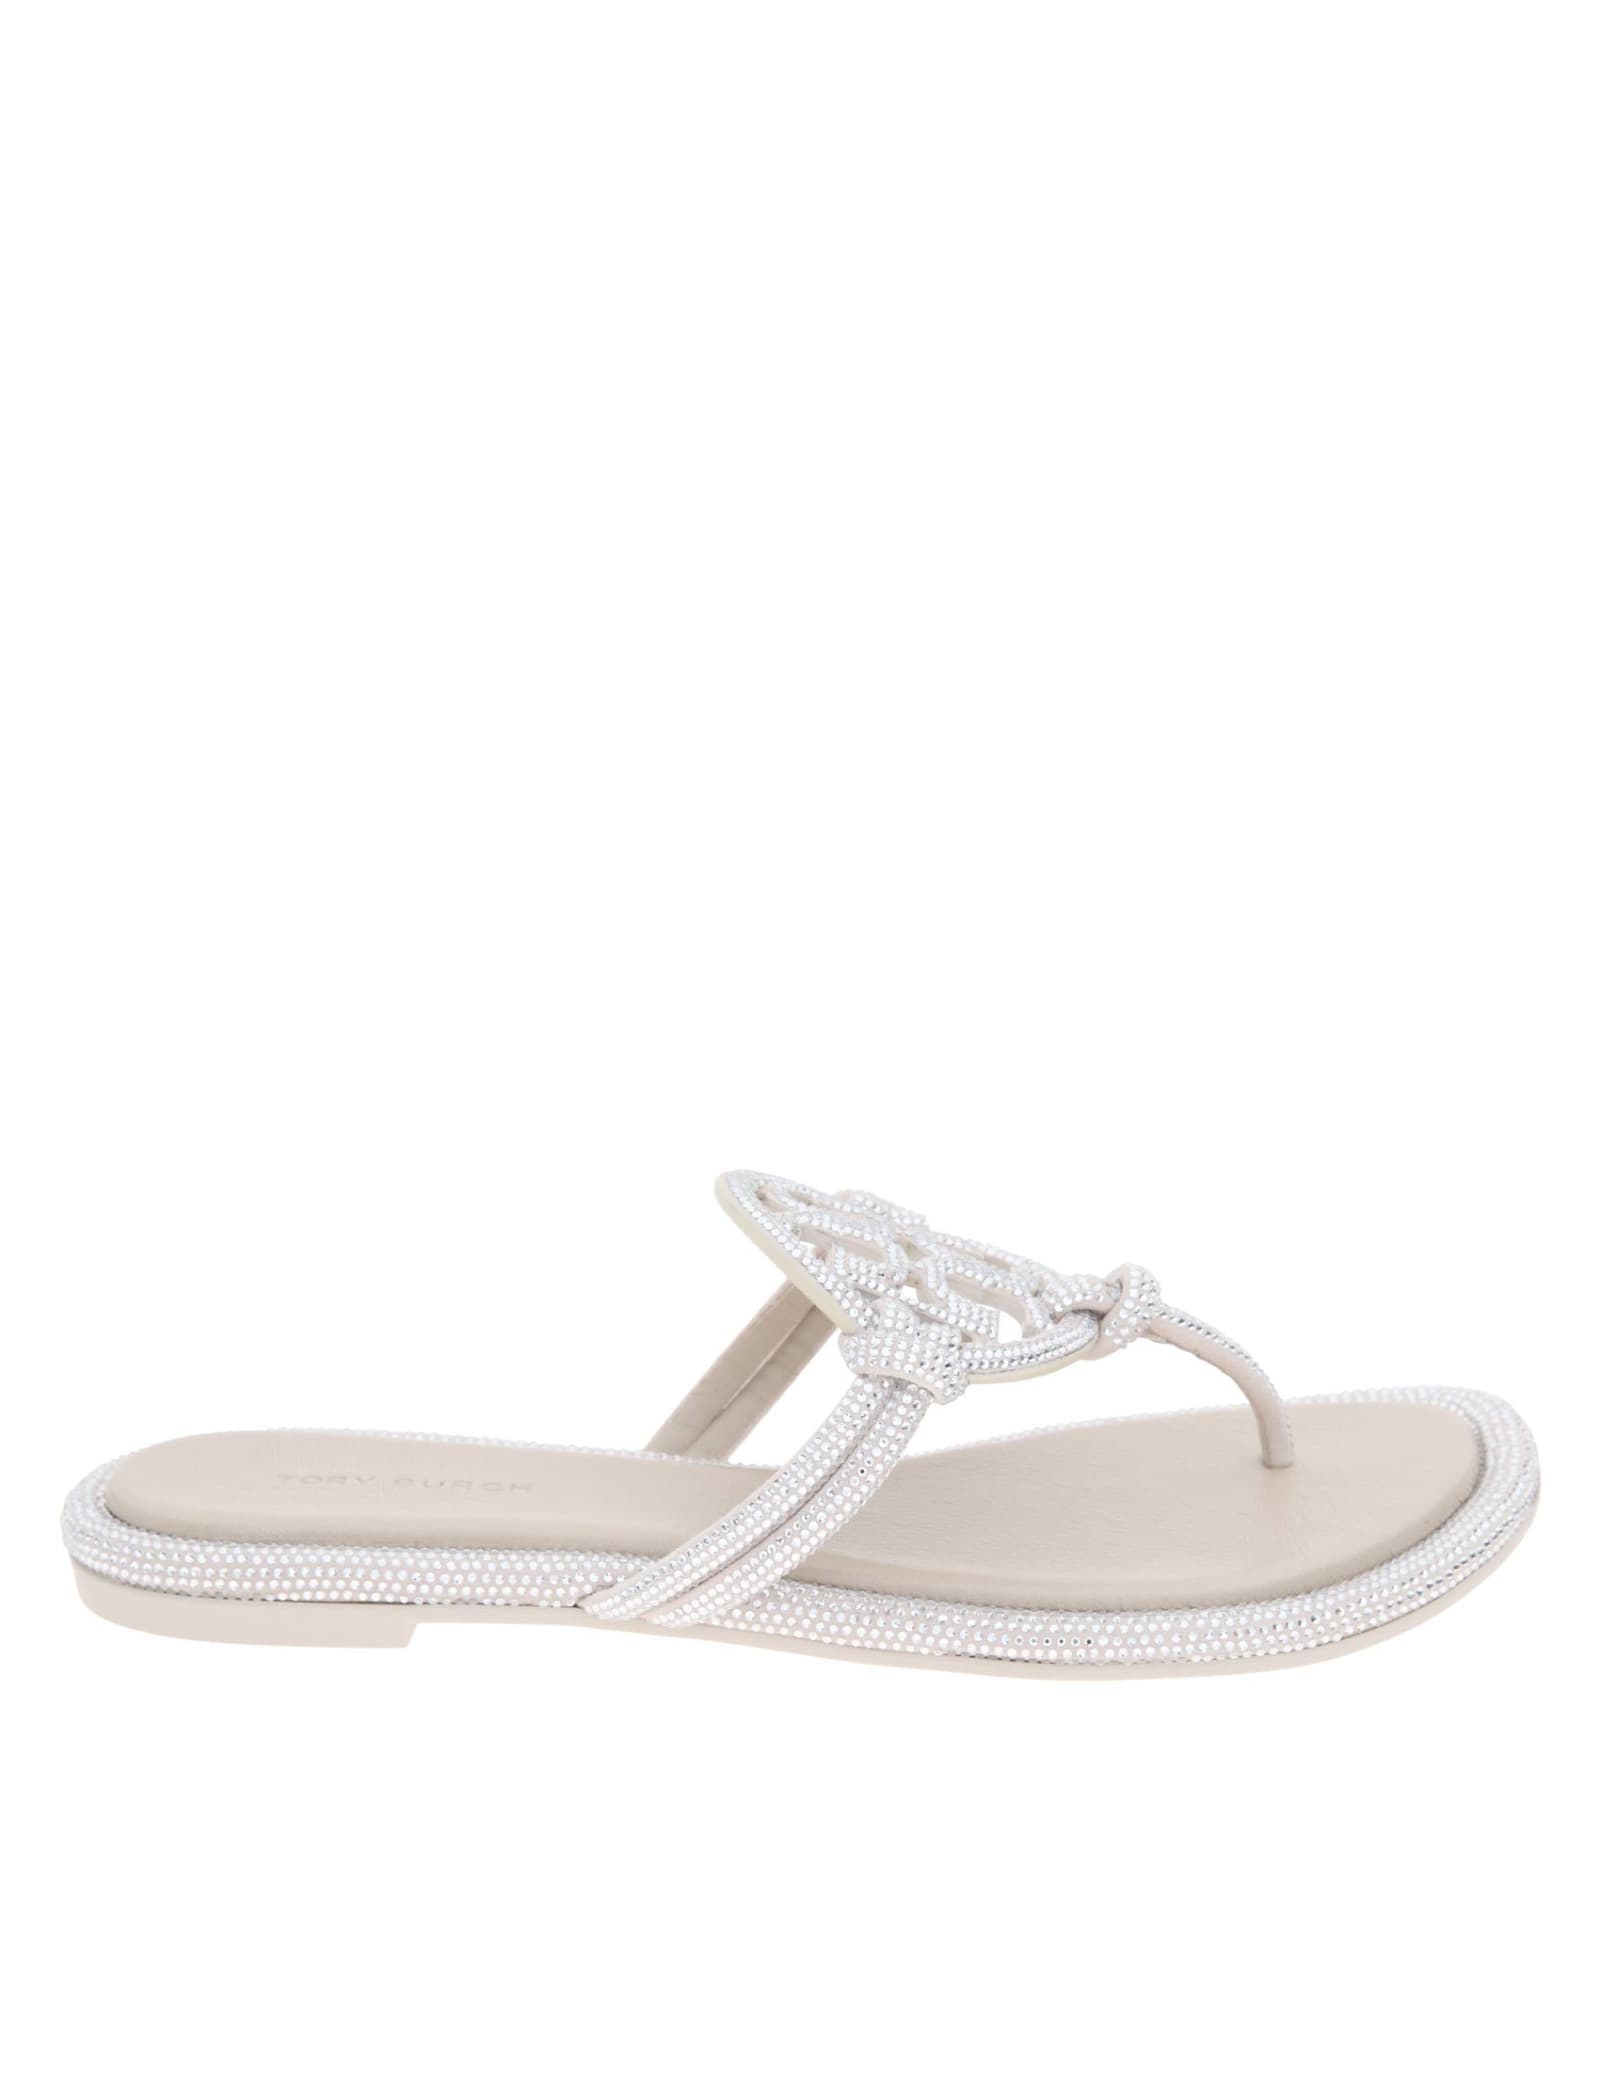 TORY BURCH MILLER SANDAL IN LEATHER WITH APPLIED PAVE